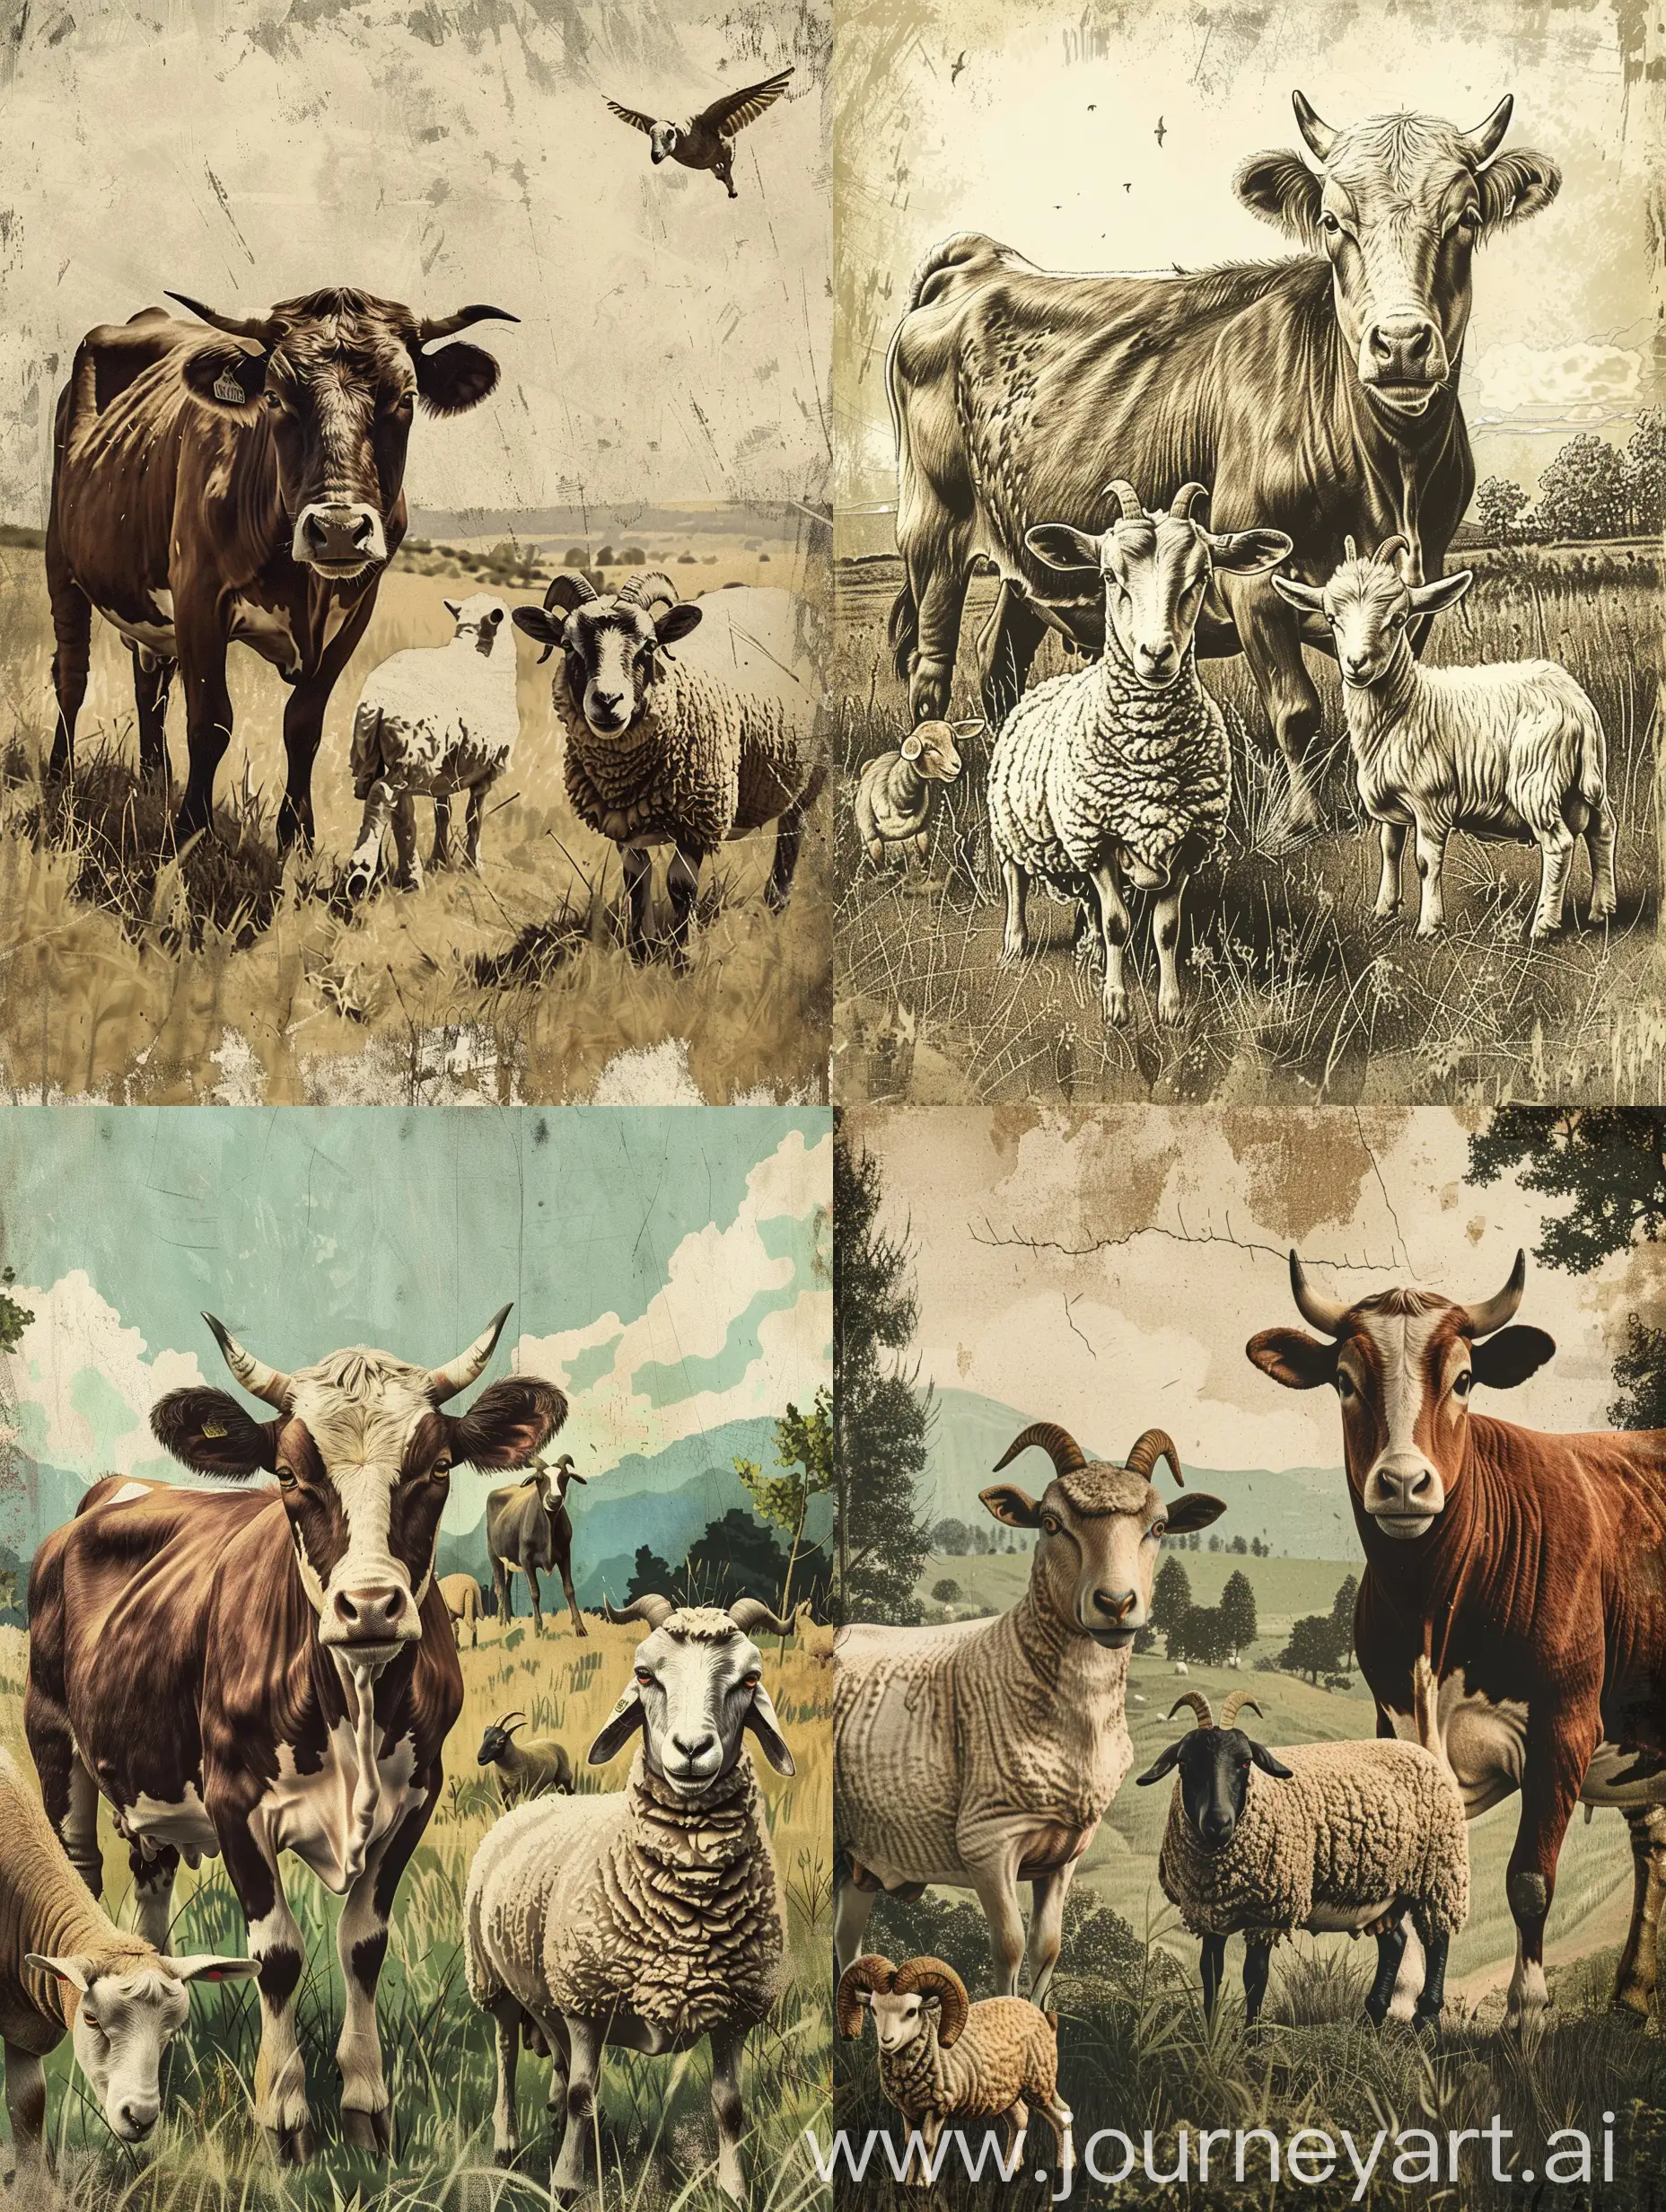 Rural-Pastoral-Scene-Cow-Sheep-and-Goat-Grazing-in-Vintage-Illustration-Style